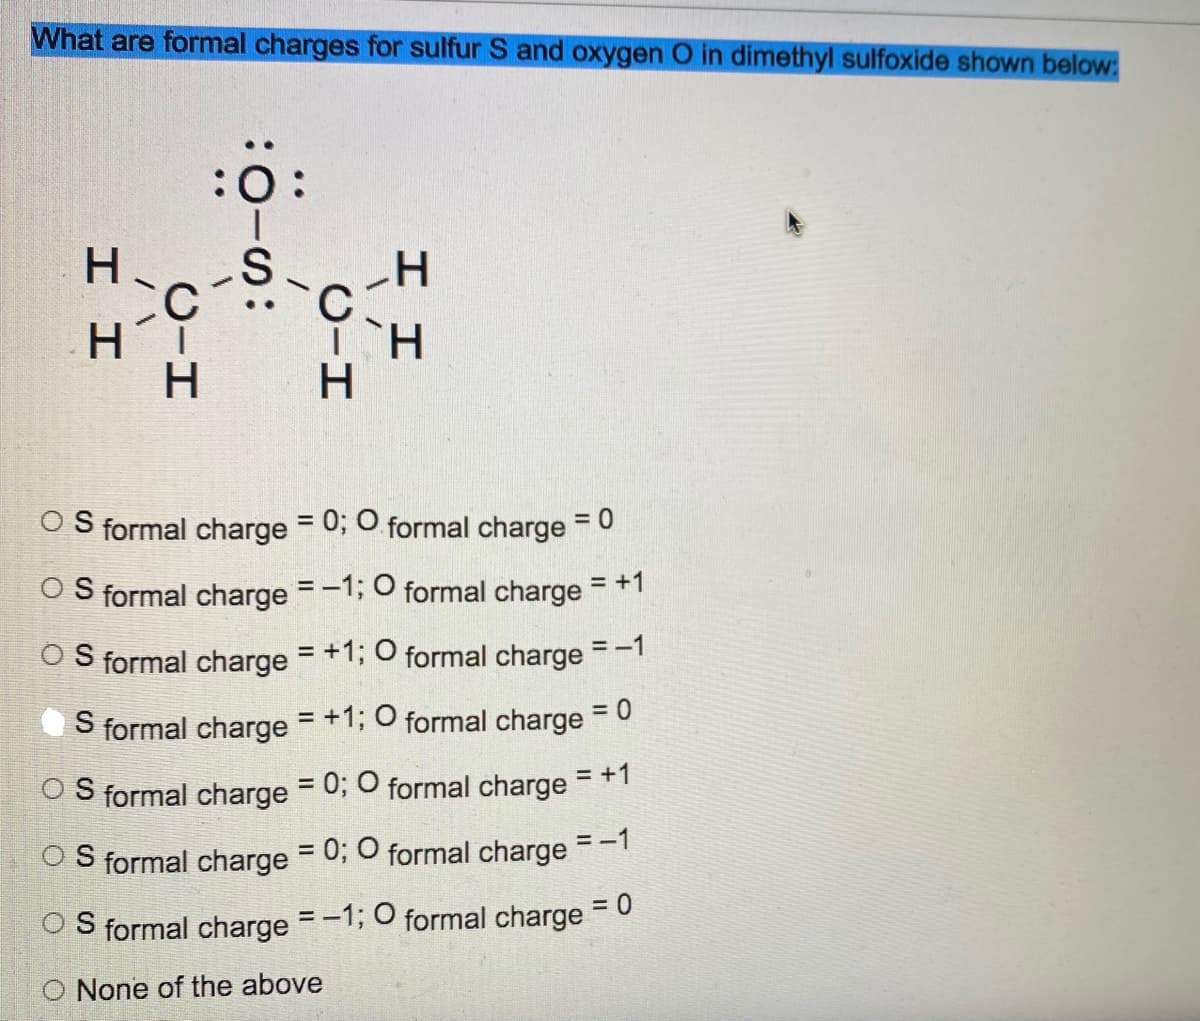 What are formal charges for sulfur S and oxygen O in dimethyl sulfoxide shown below:
:Ö:
HC-S-C-H
H
HT
H
ΤῊ H
H
OS formal charge = 0; O formal charge = 0
OS formal charge = -1; O formal charge = +1
OS formal charge = +1; O formal charge = -1
S formal charge = +1; O formal charge = 0
OS formal charge = 0; O formal charge = +1
OS formal charge = 0; O formal charge = -1
OS formal charge = -1; O formal charge
= 0
O None of the above